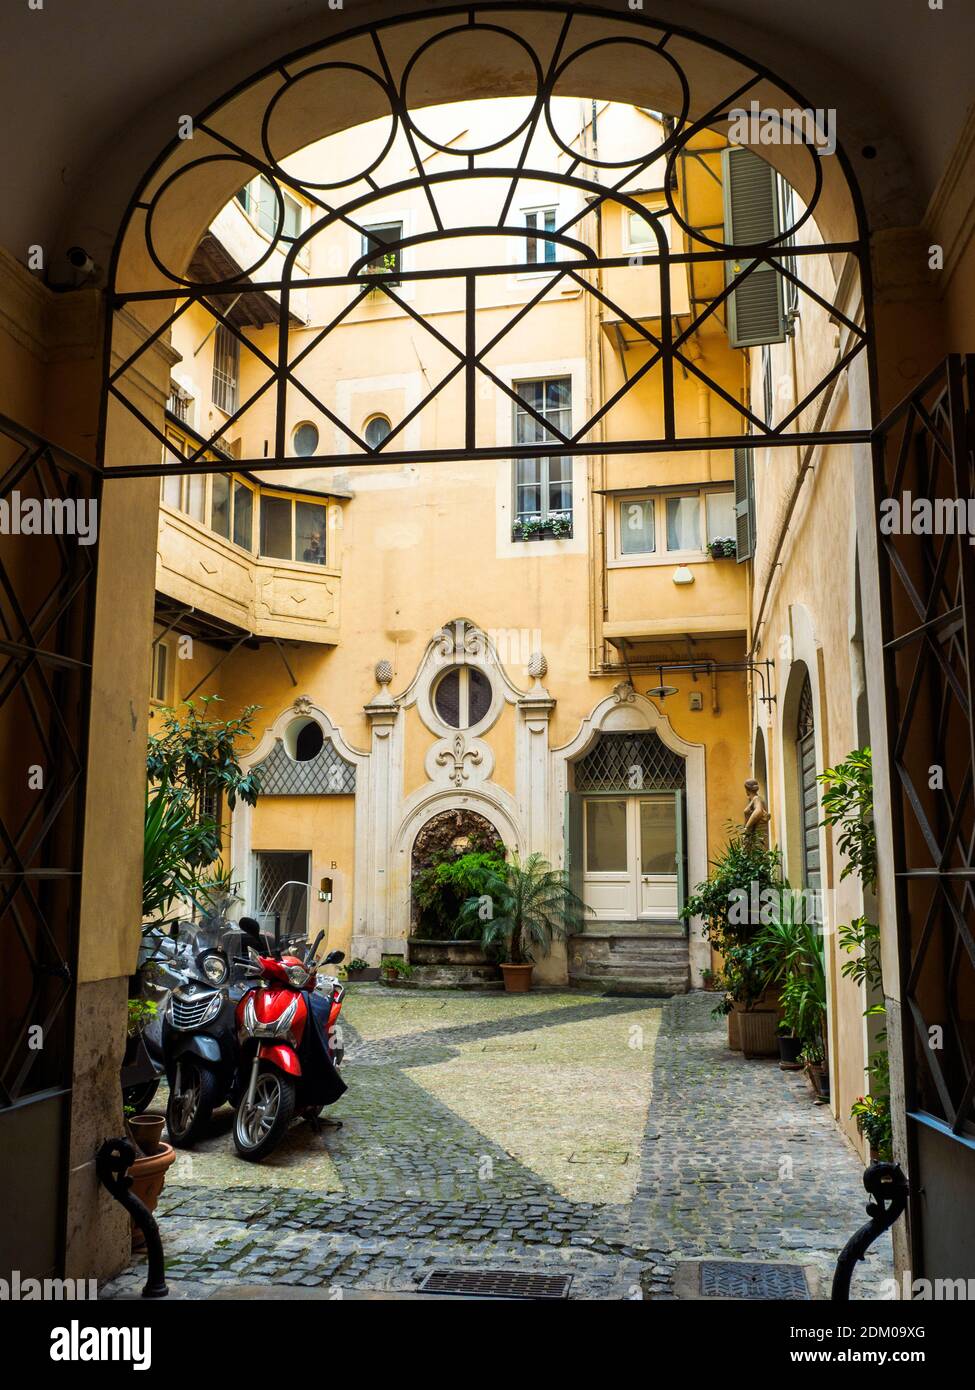 Courtyard of a historic building in rione Regola - Rome, Italy Stock Photo